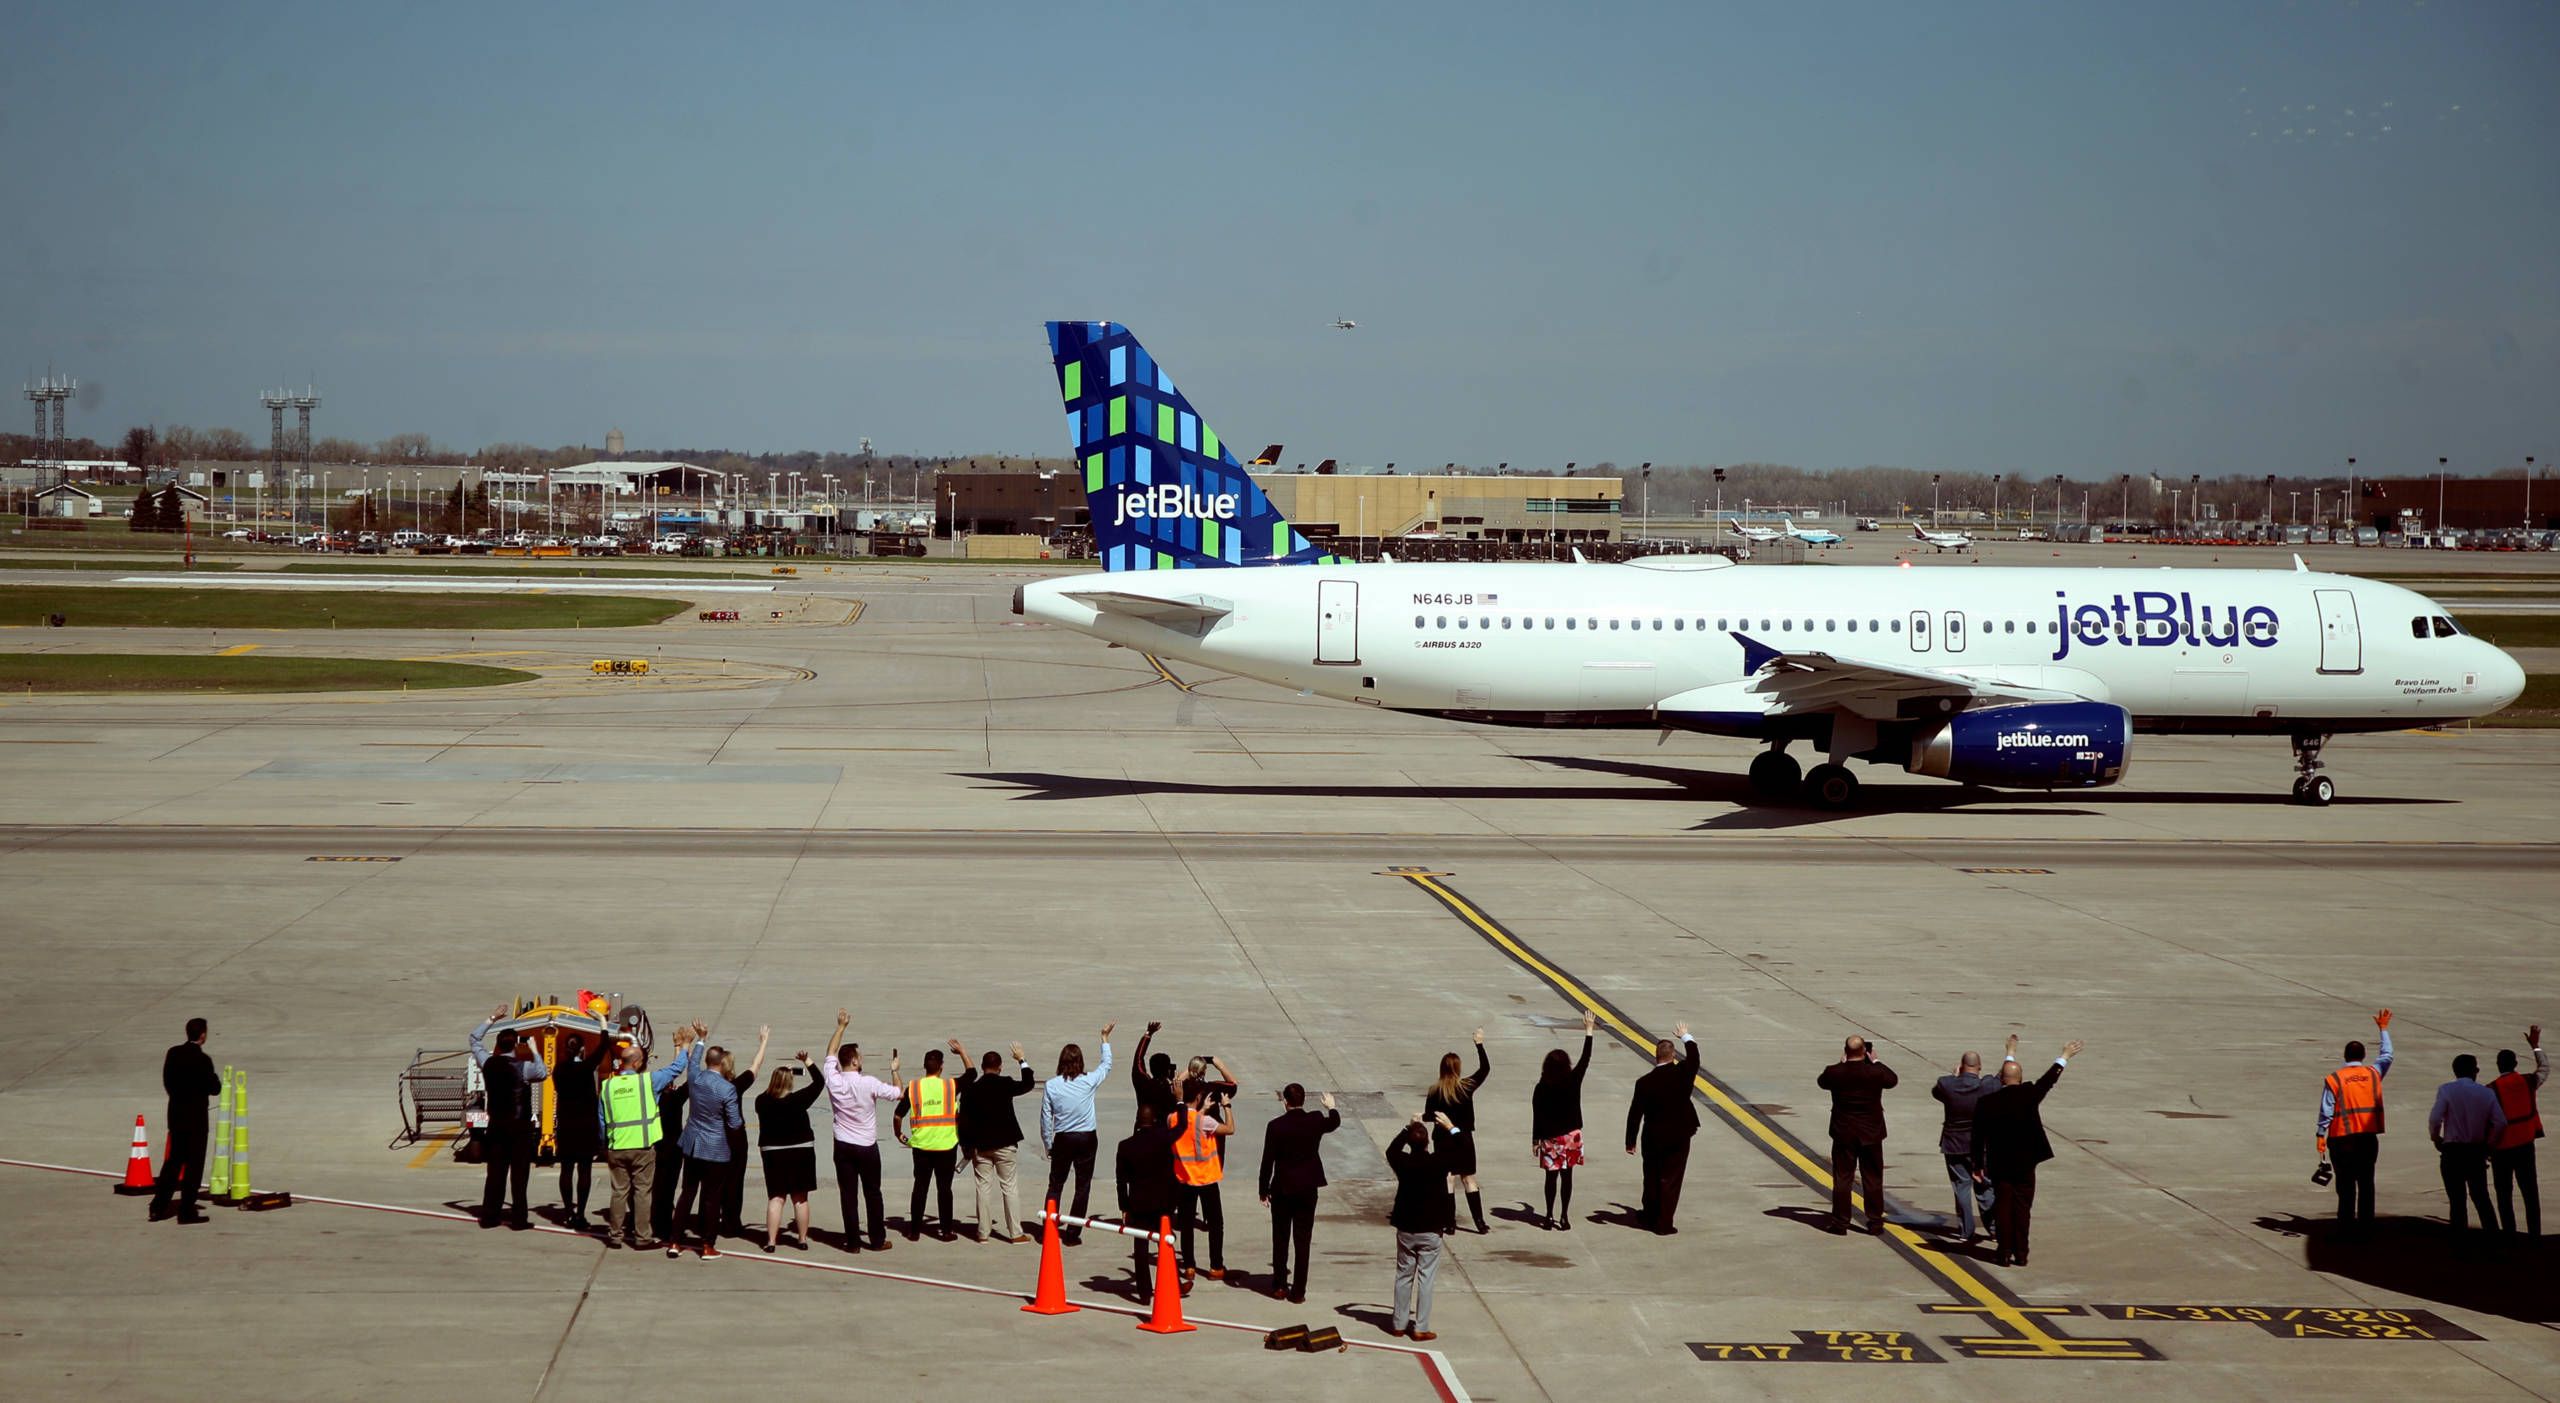 JetBlue among first US airlines to seek waivers to suspend flights